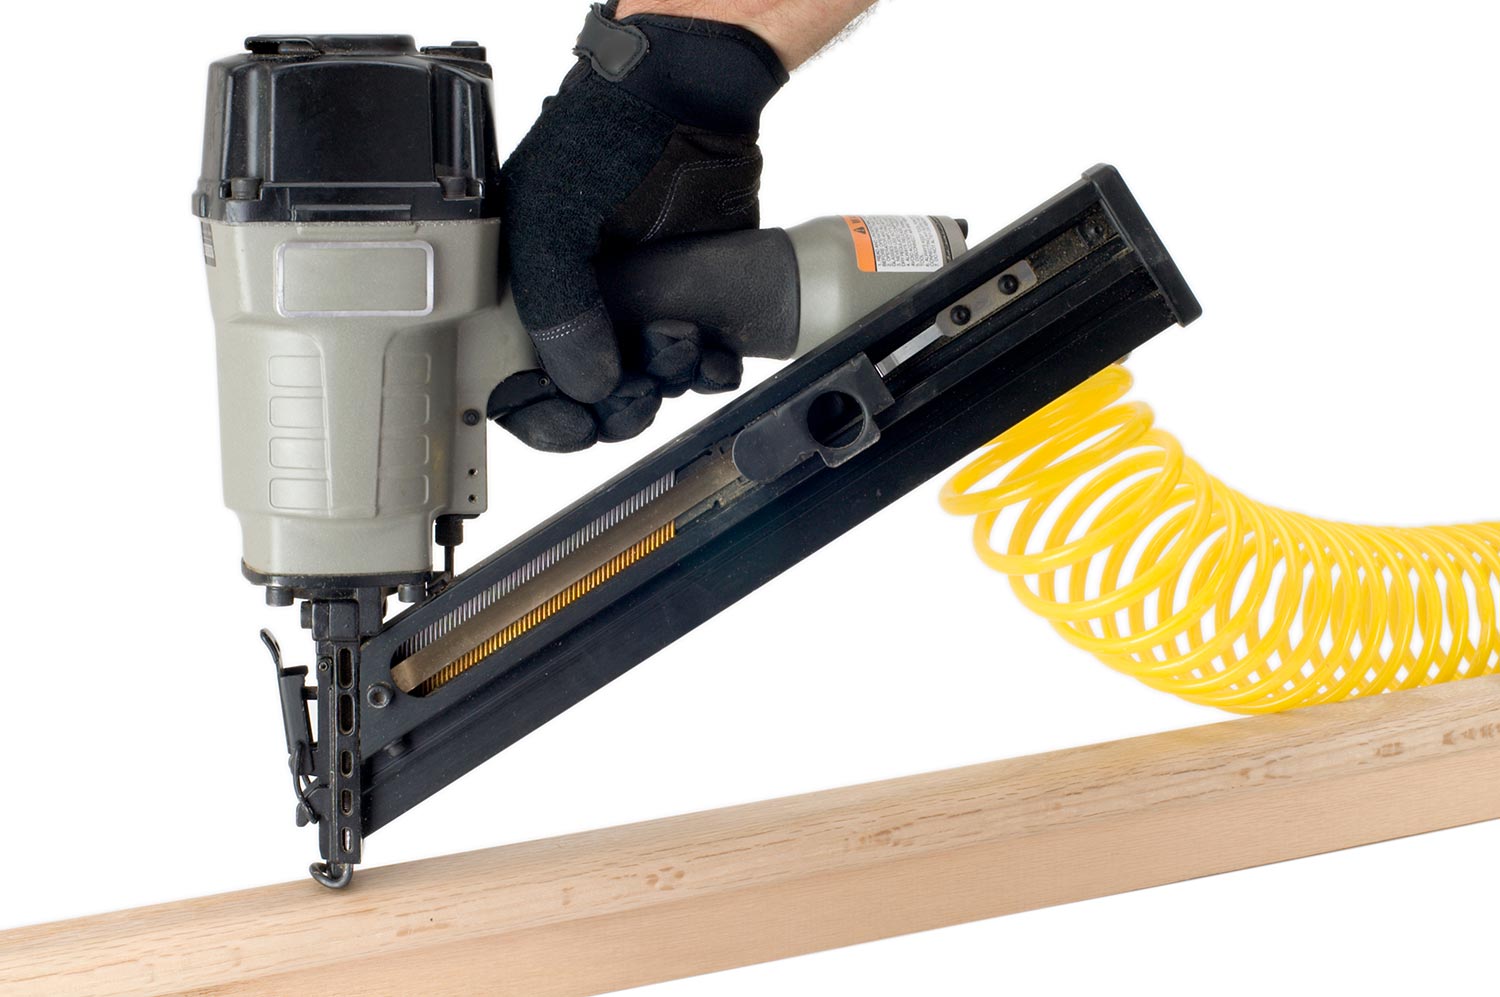 Pneumatic nail gun is being used to join tow pieces of oak trim